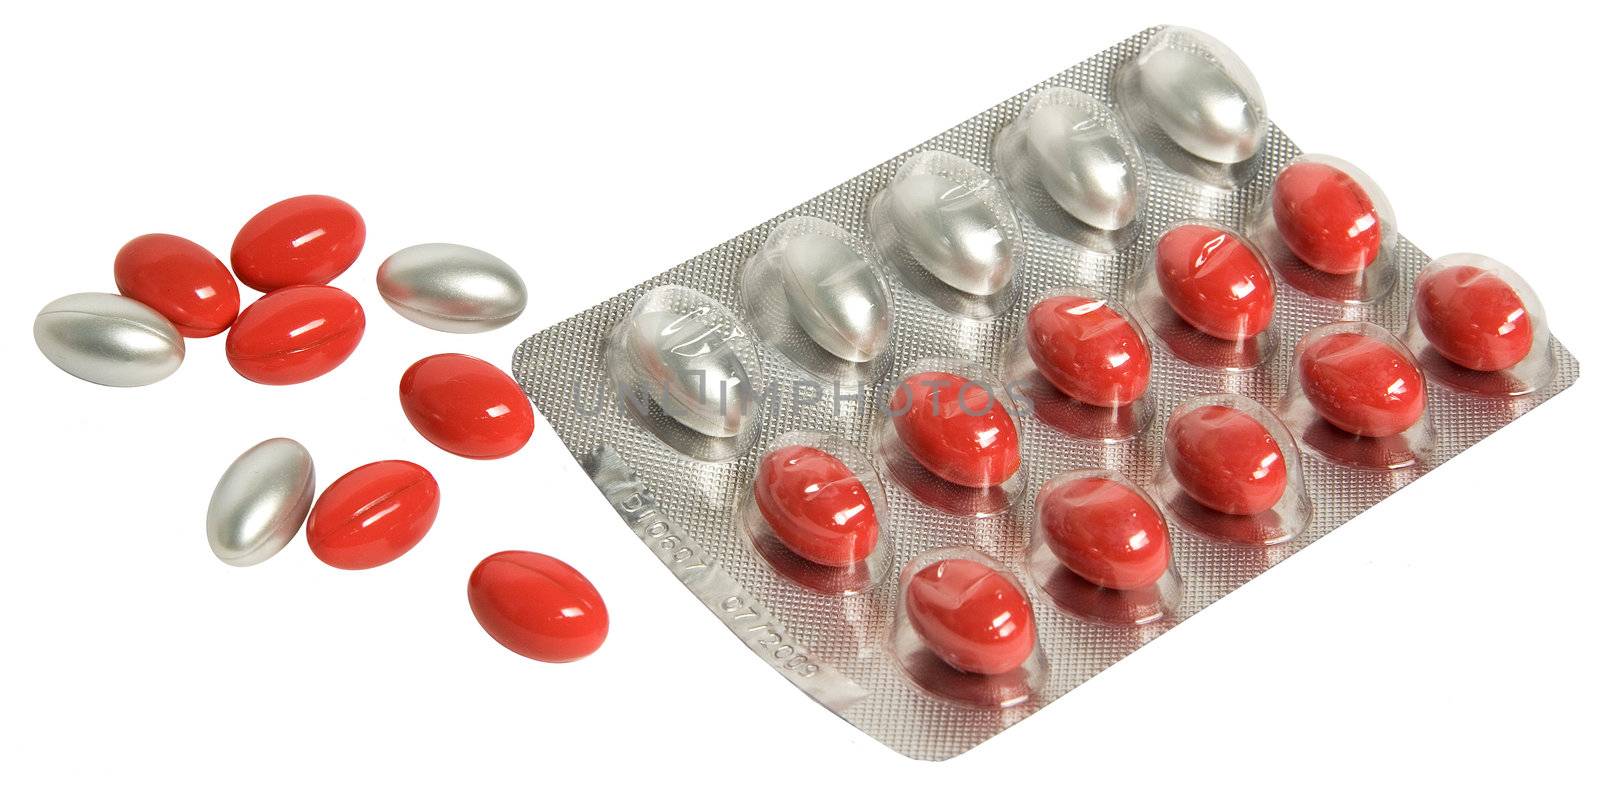 Red and silver capsules on a white background